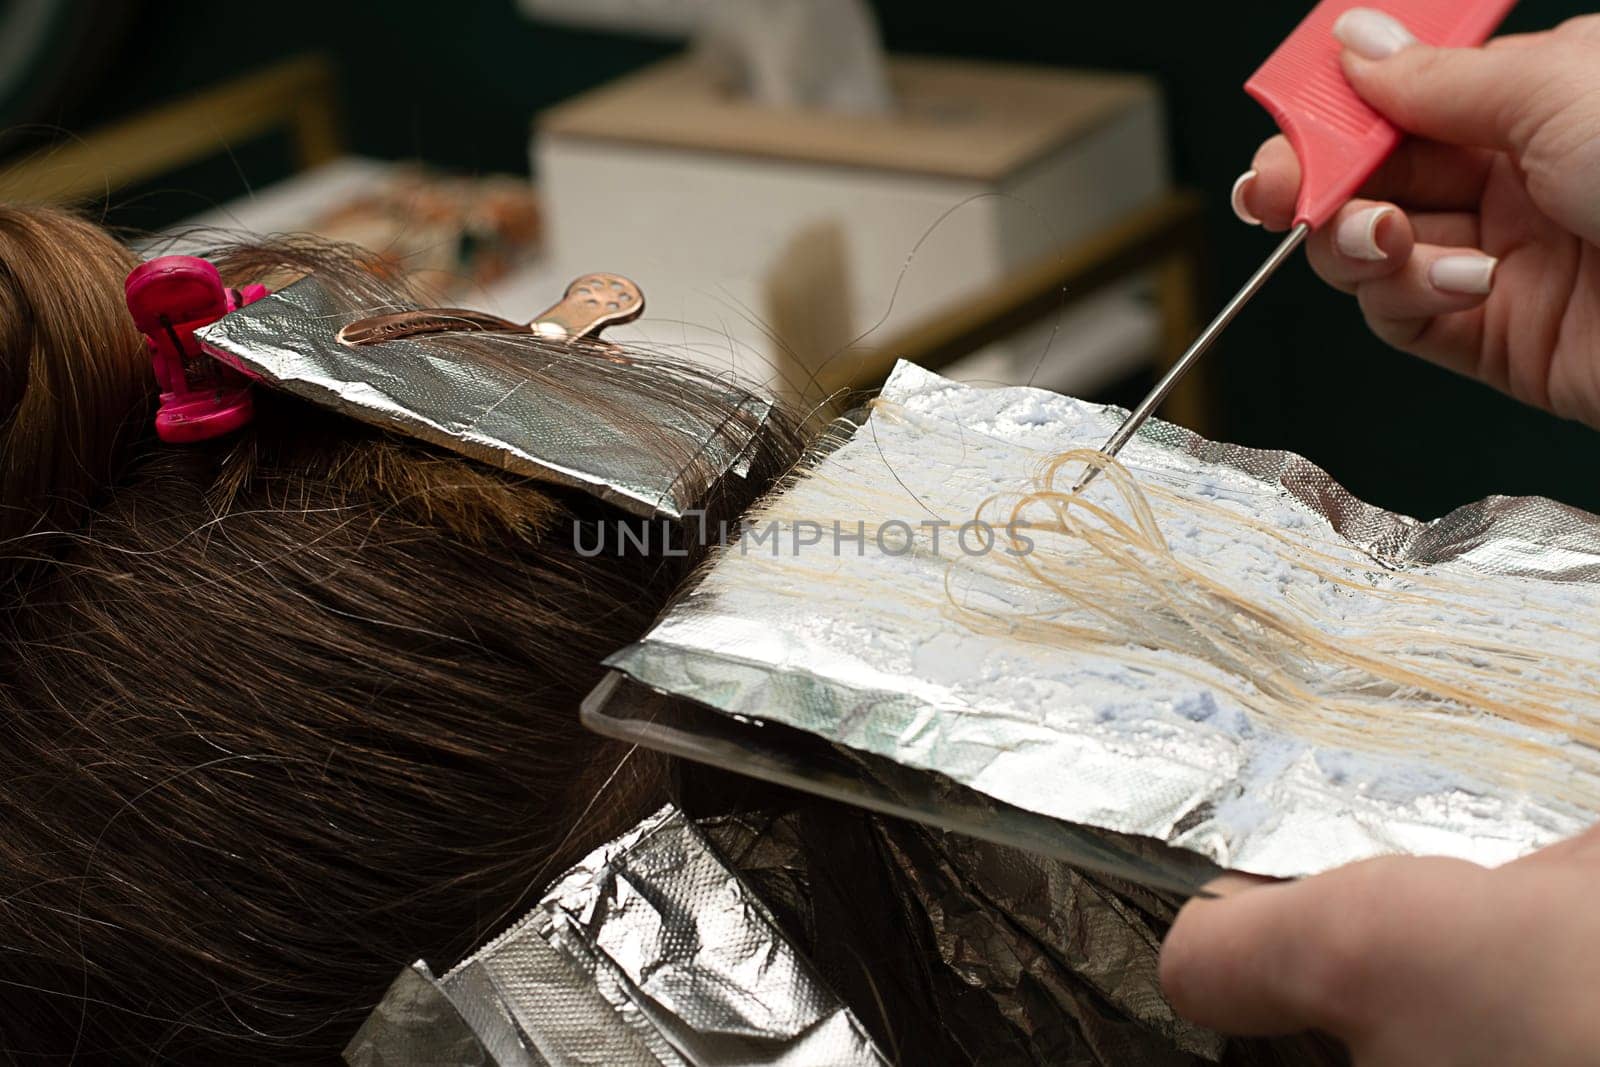 Beauty sphere. Highlighting. Air touch. Hair coloring in a beauty salon. A master hairdresser-colorist dyes a client's brown hair blond. Apply lightening powder to hair on foil with a brush. Close-up.